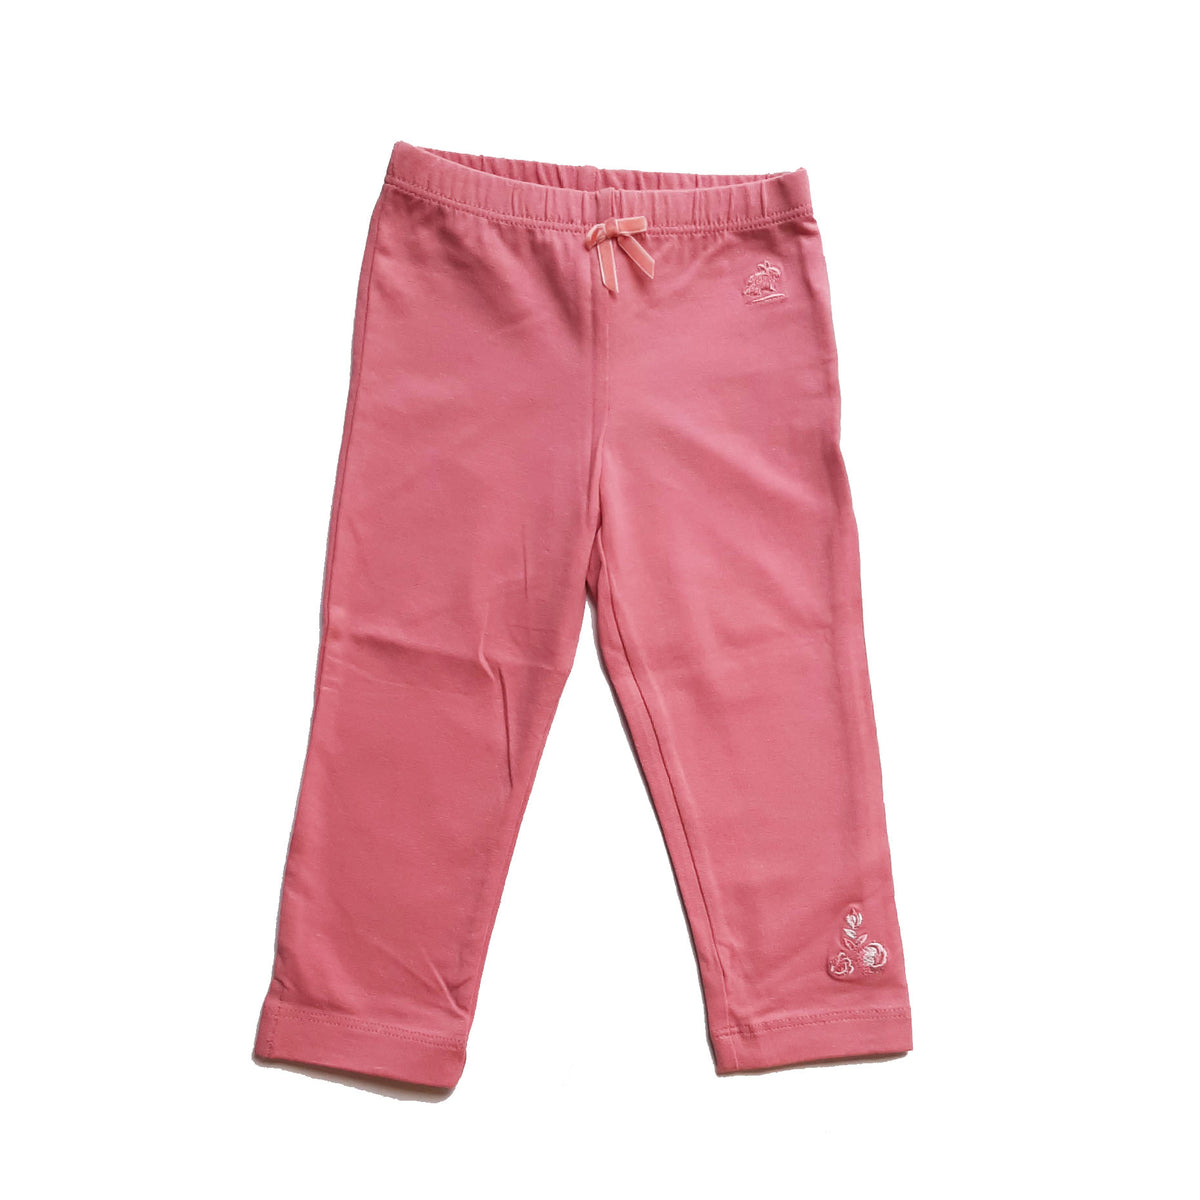 Leggings Babycottons Queen Anne Bord Rosa Oscuro